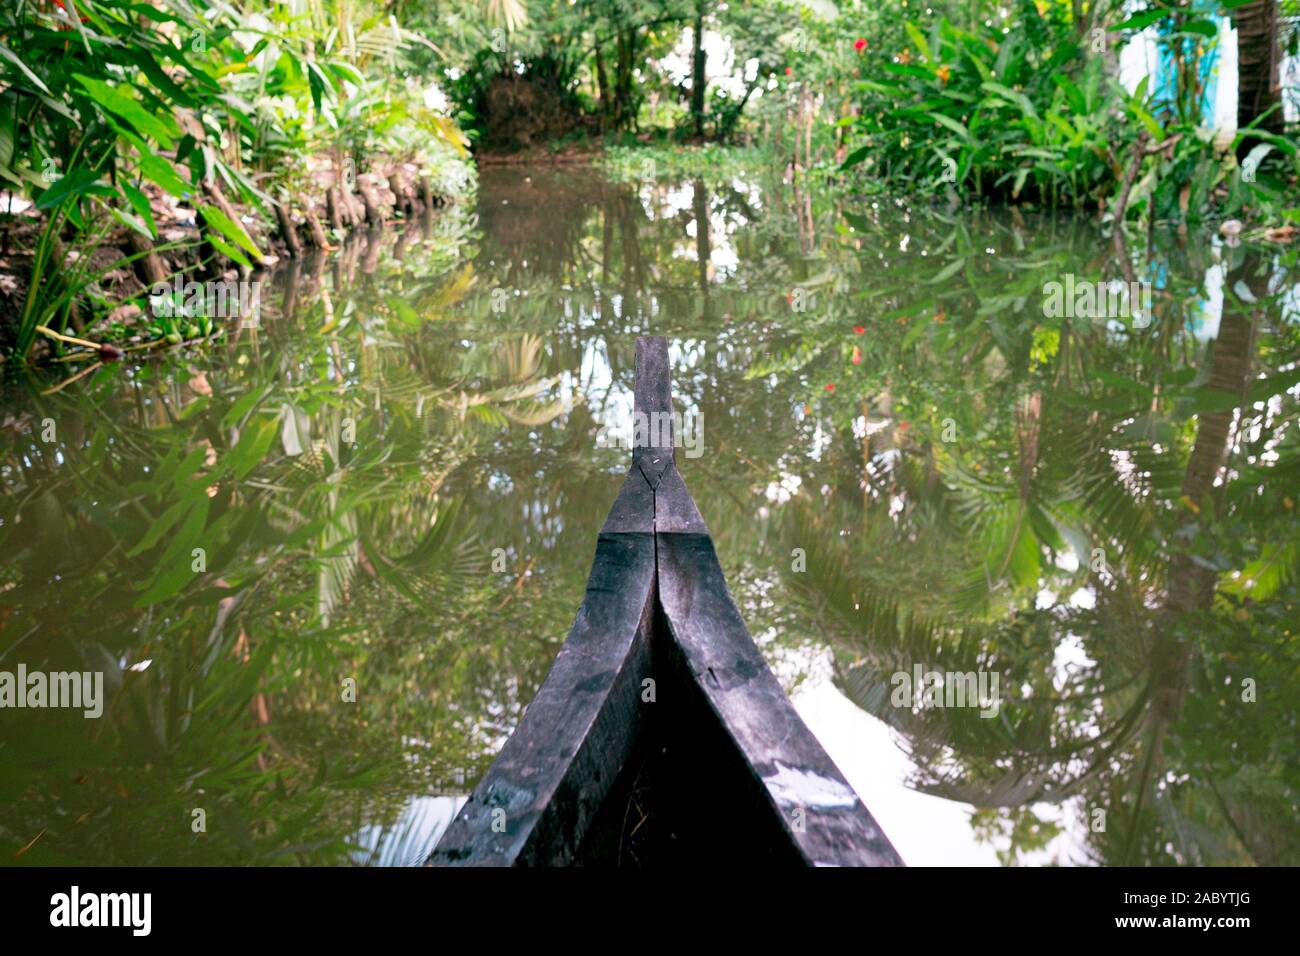 riding wood fishing boat in kerala backwaters village water channel under palm trees, a pristine natural environment during monsoon season Stock Photo